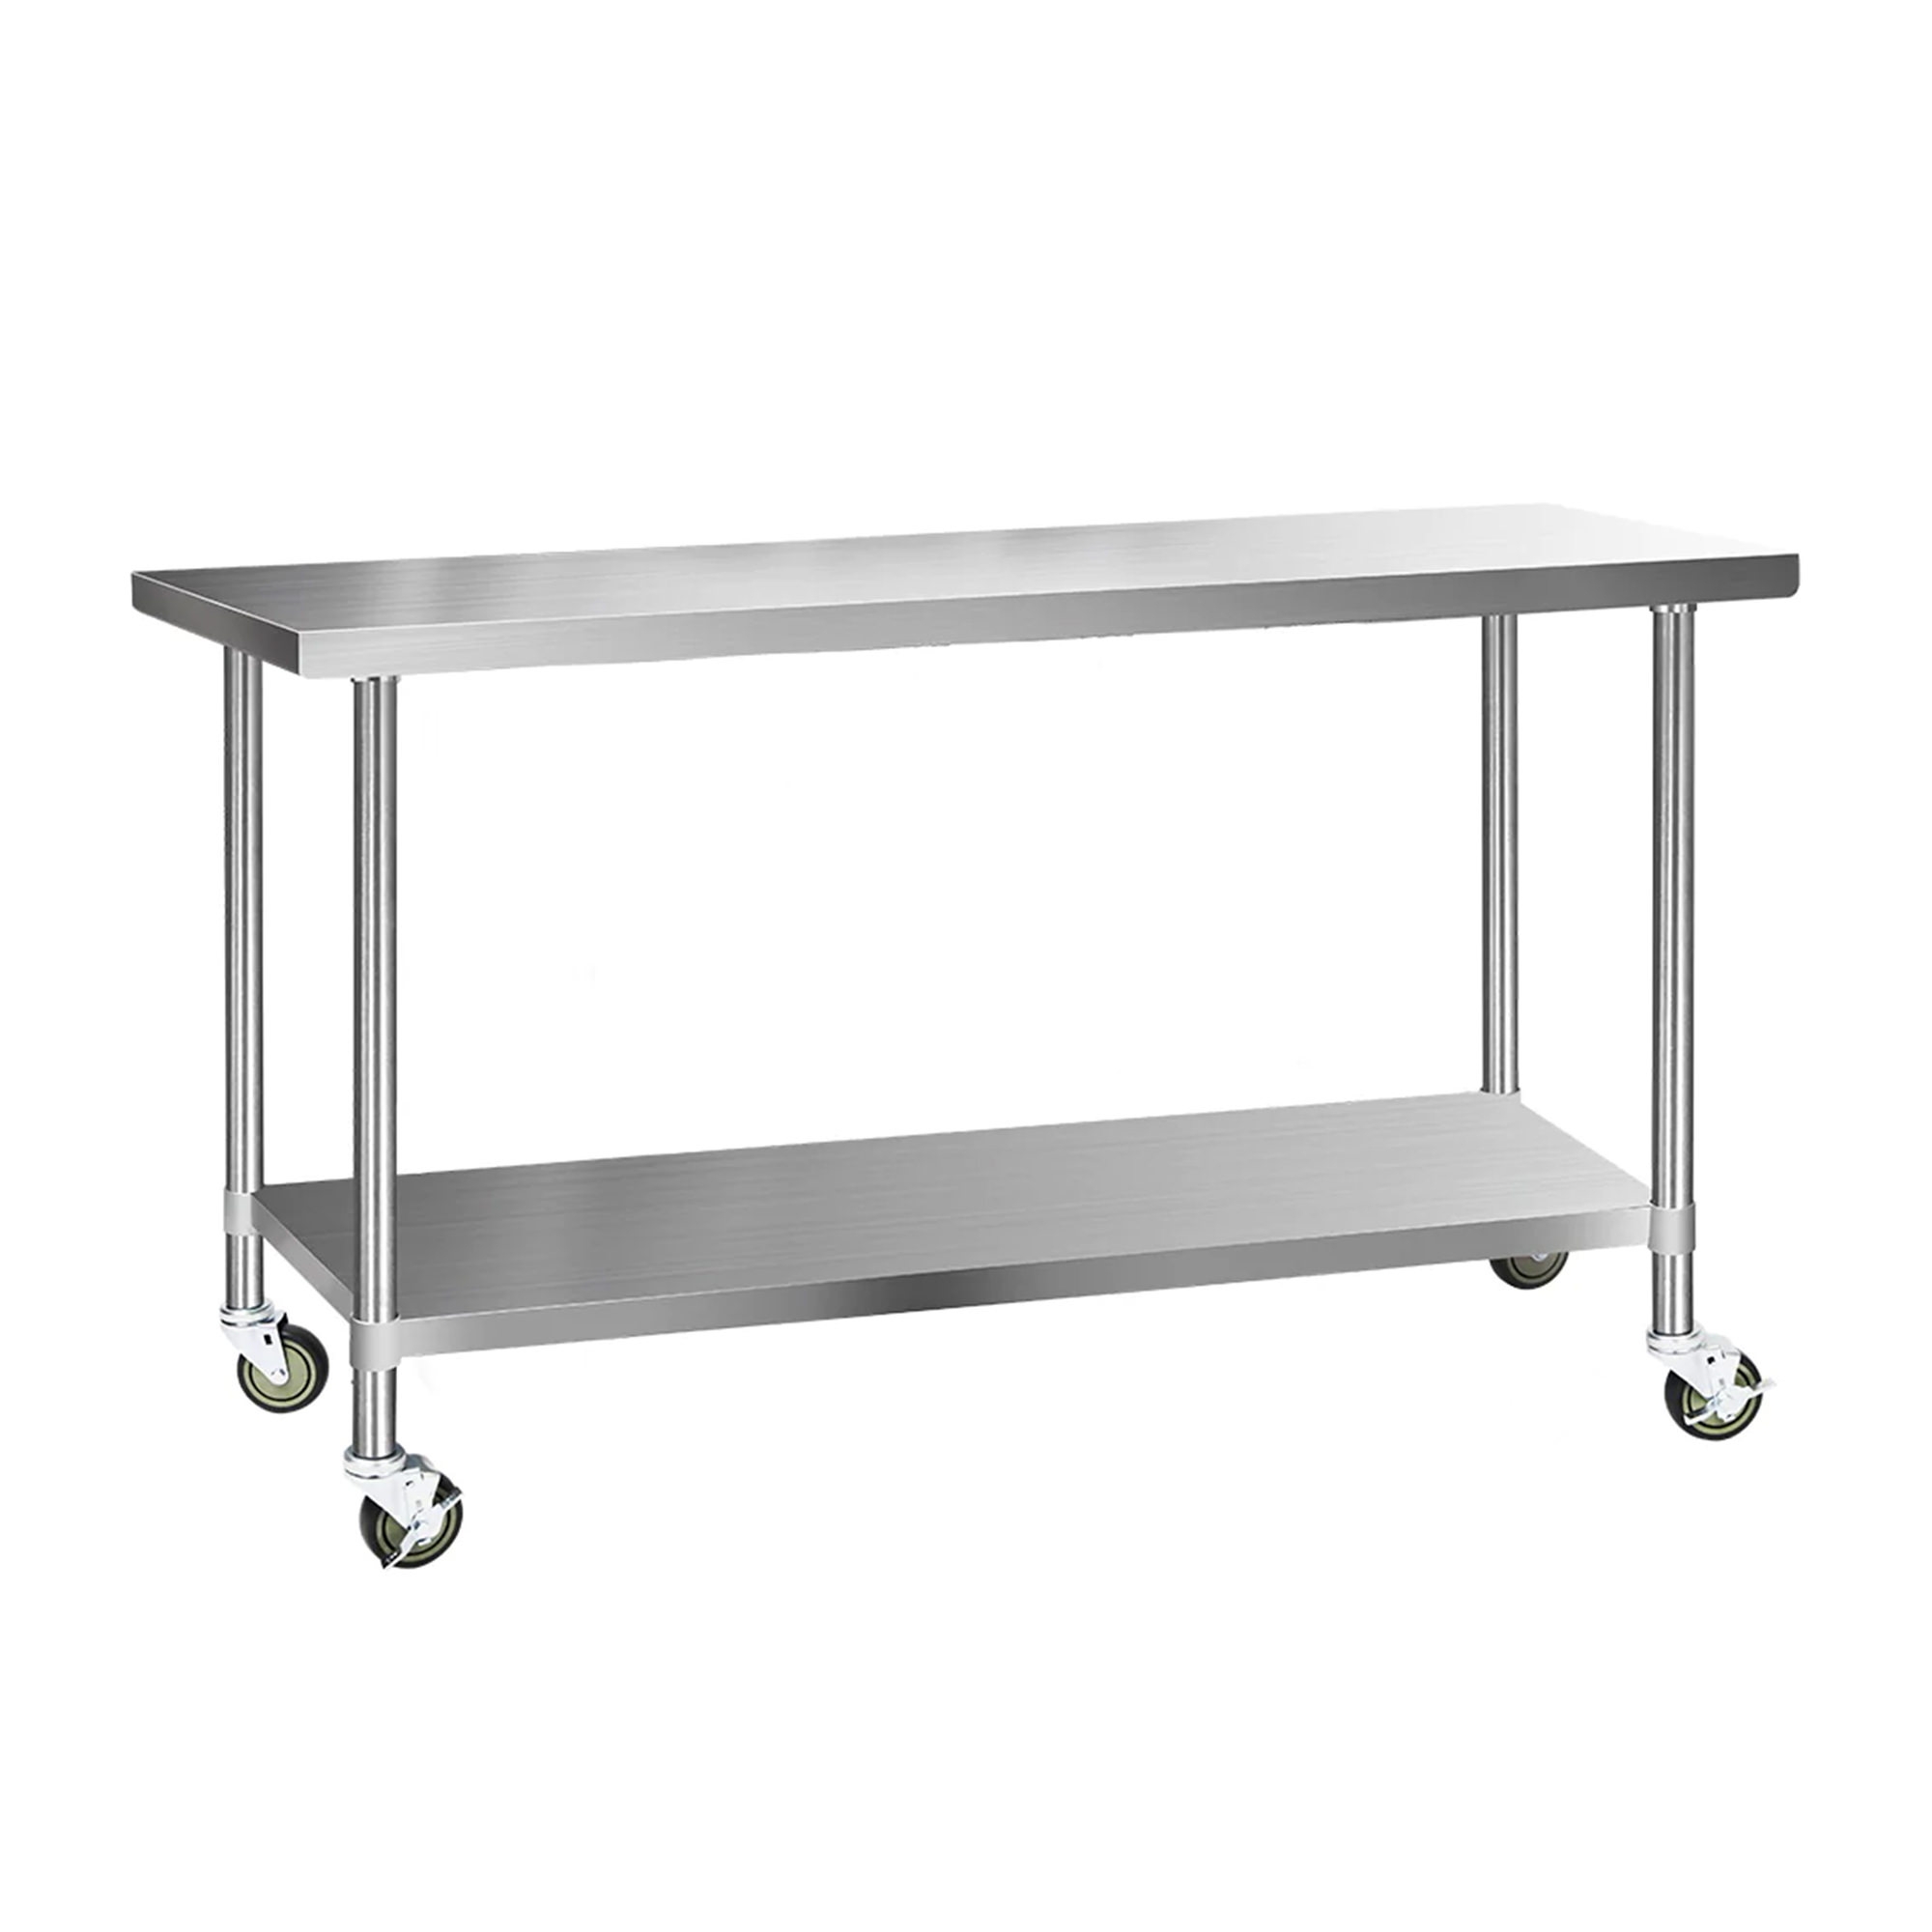 Cefito 304 Stainless Steel Kitchen Bench with Wheels 182.9x61cm Image 1